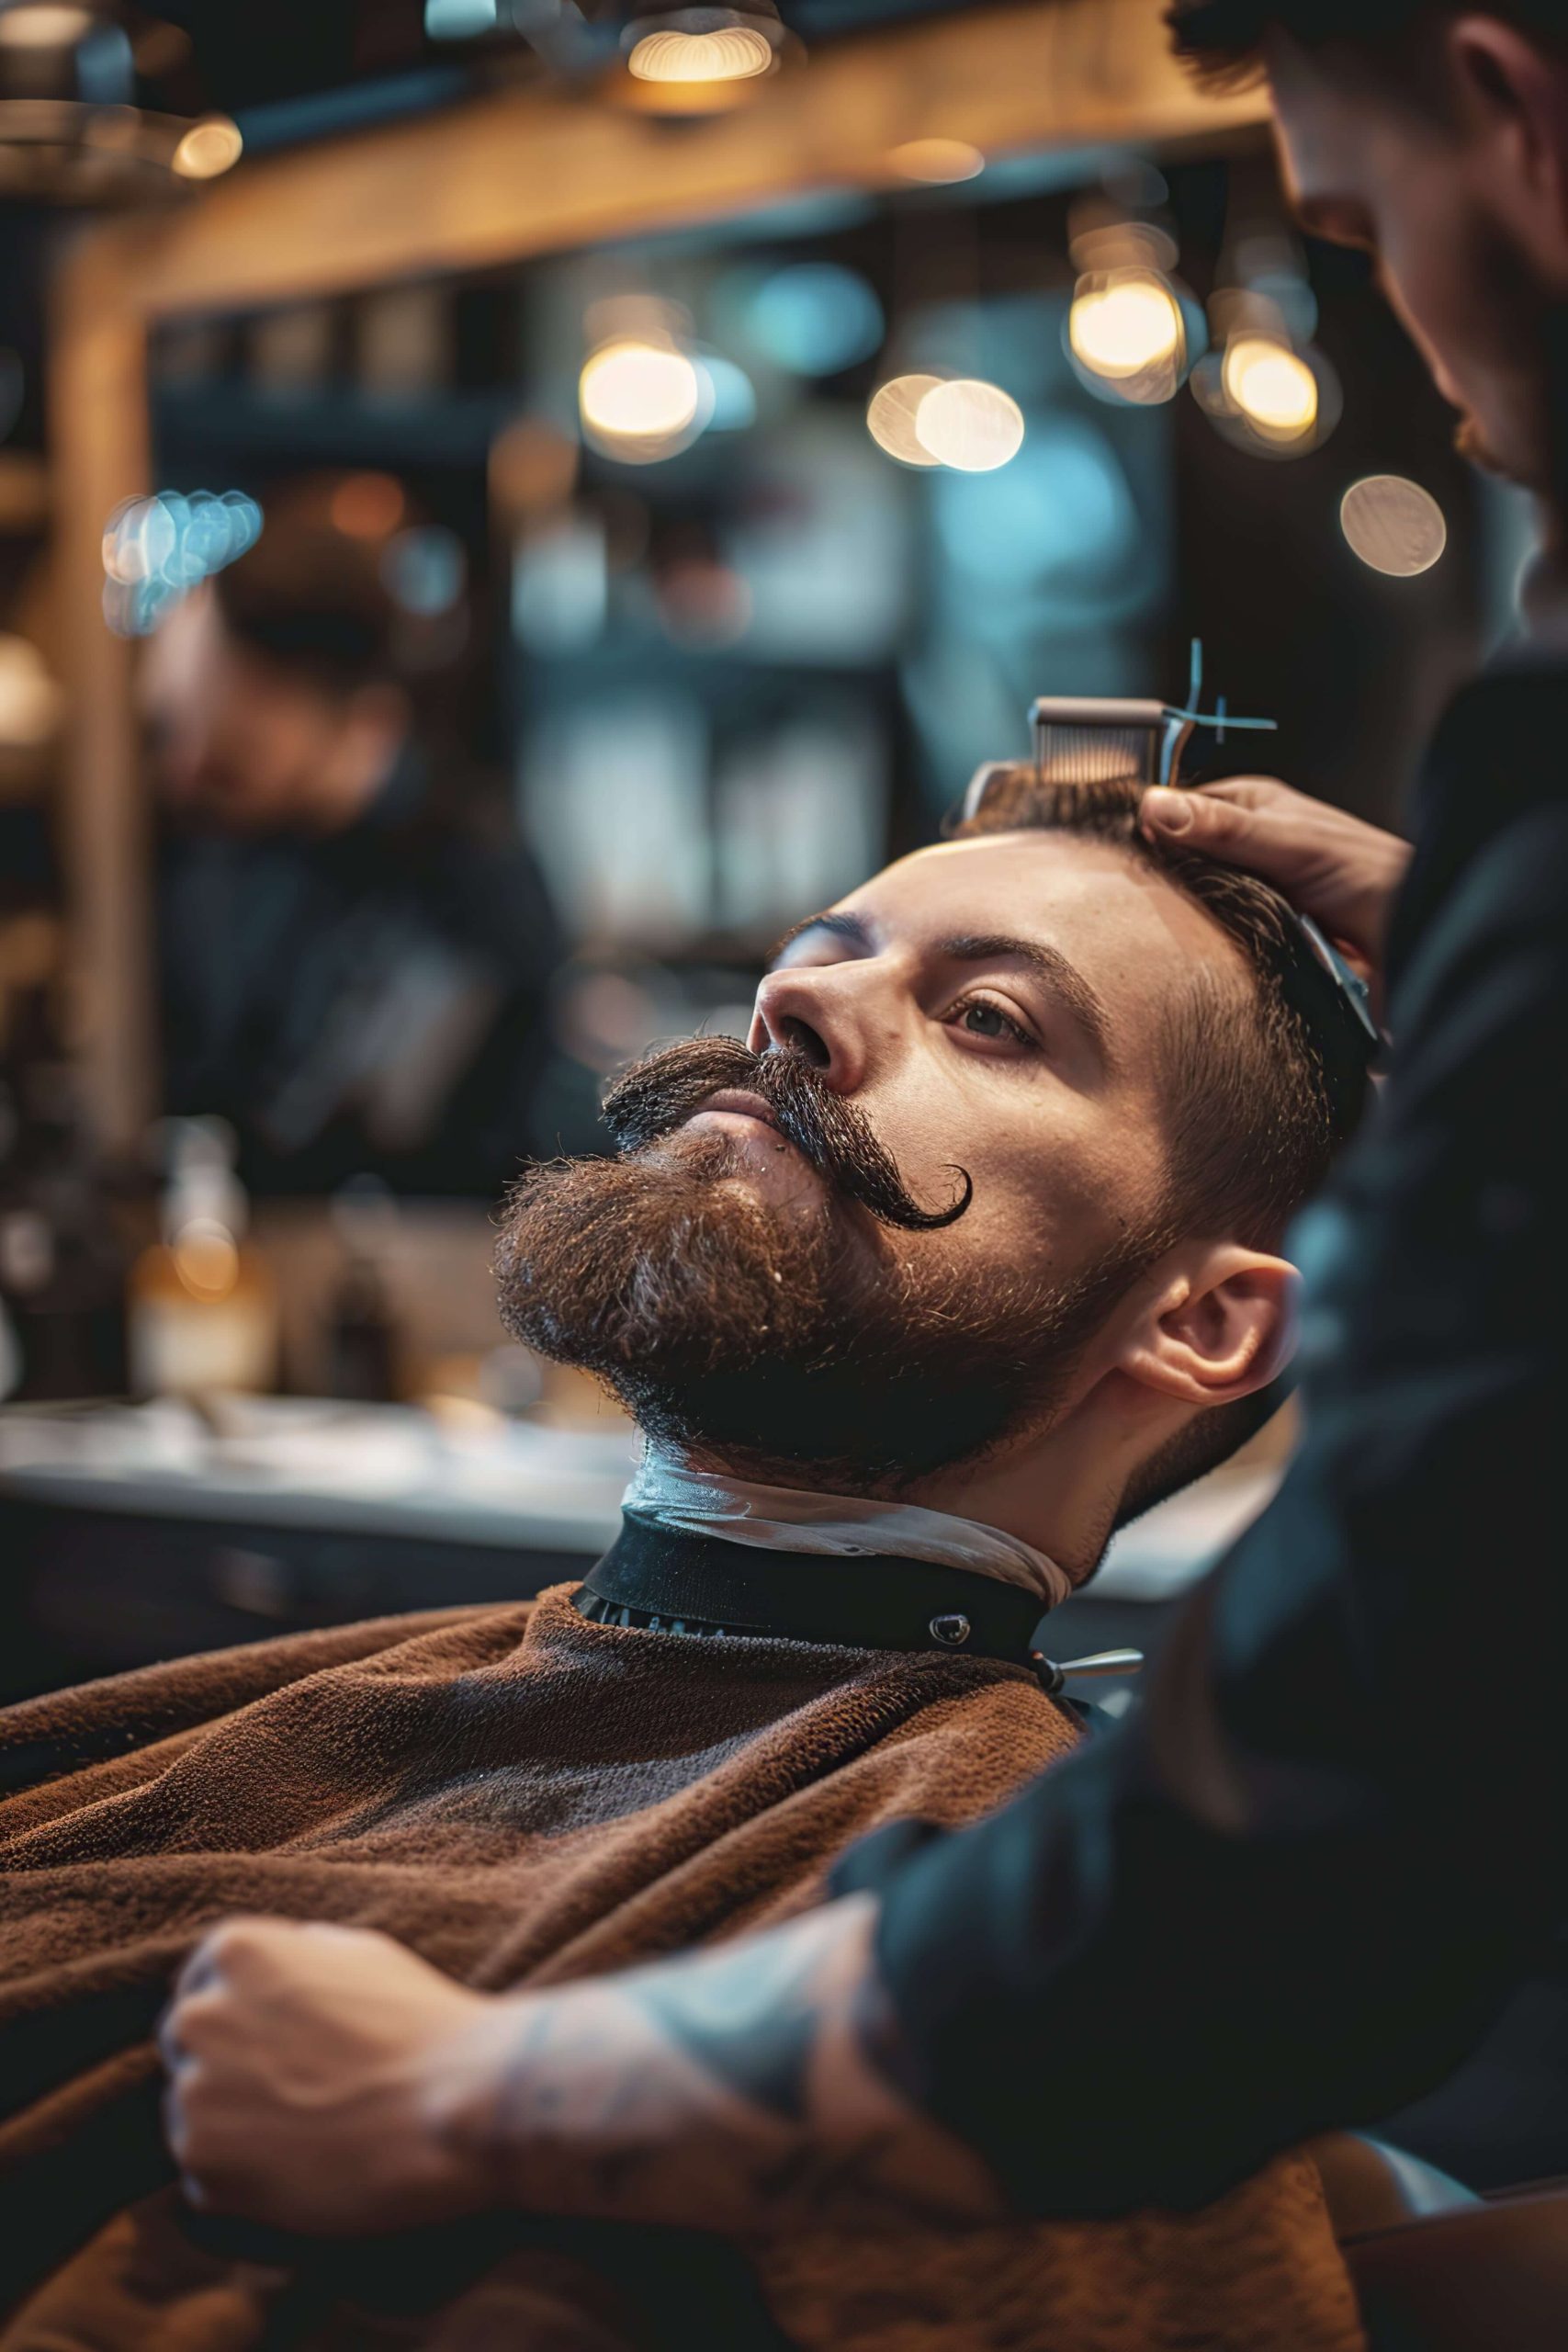 Top 6 summer cuts for boys to beat the heat | Beauty Tips News - News9live